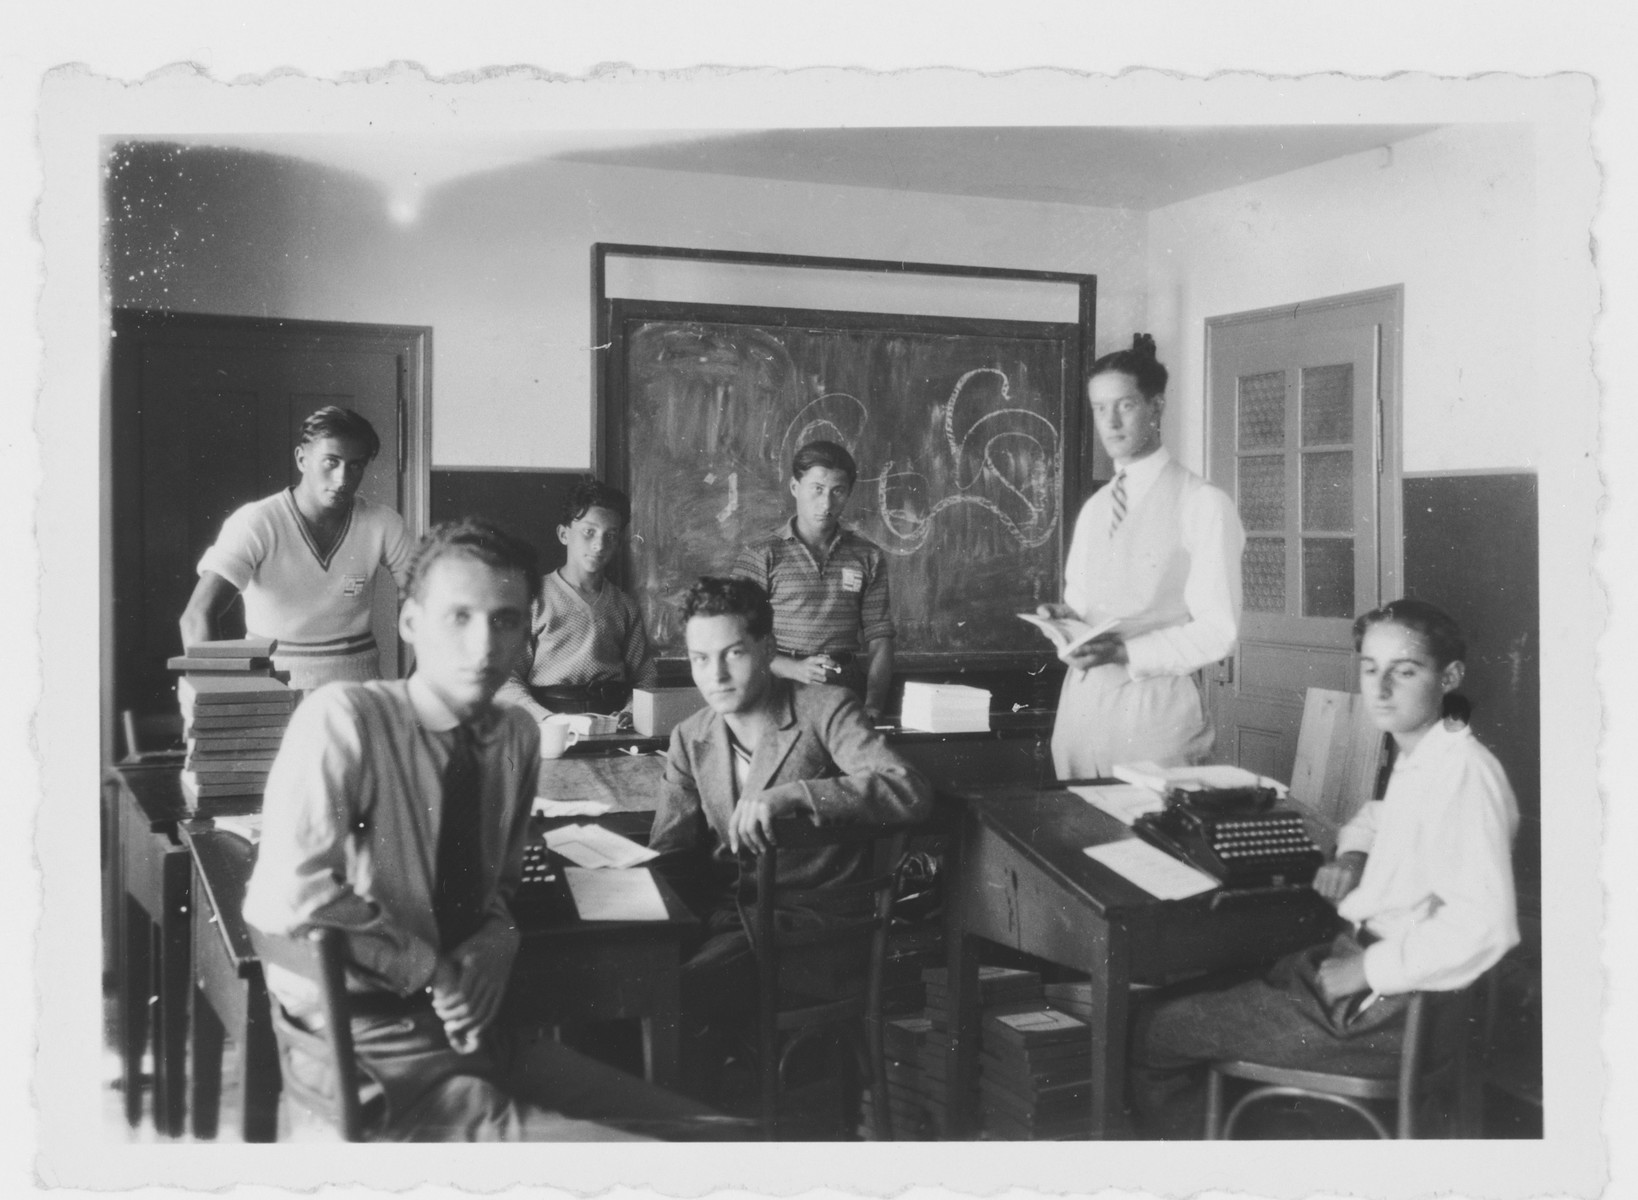 Italian teenagers sit by their desks in their high school classroom.

Mario Fabini is in the center in a suit.